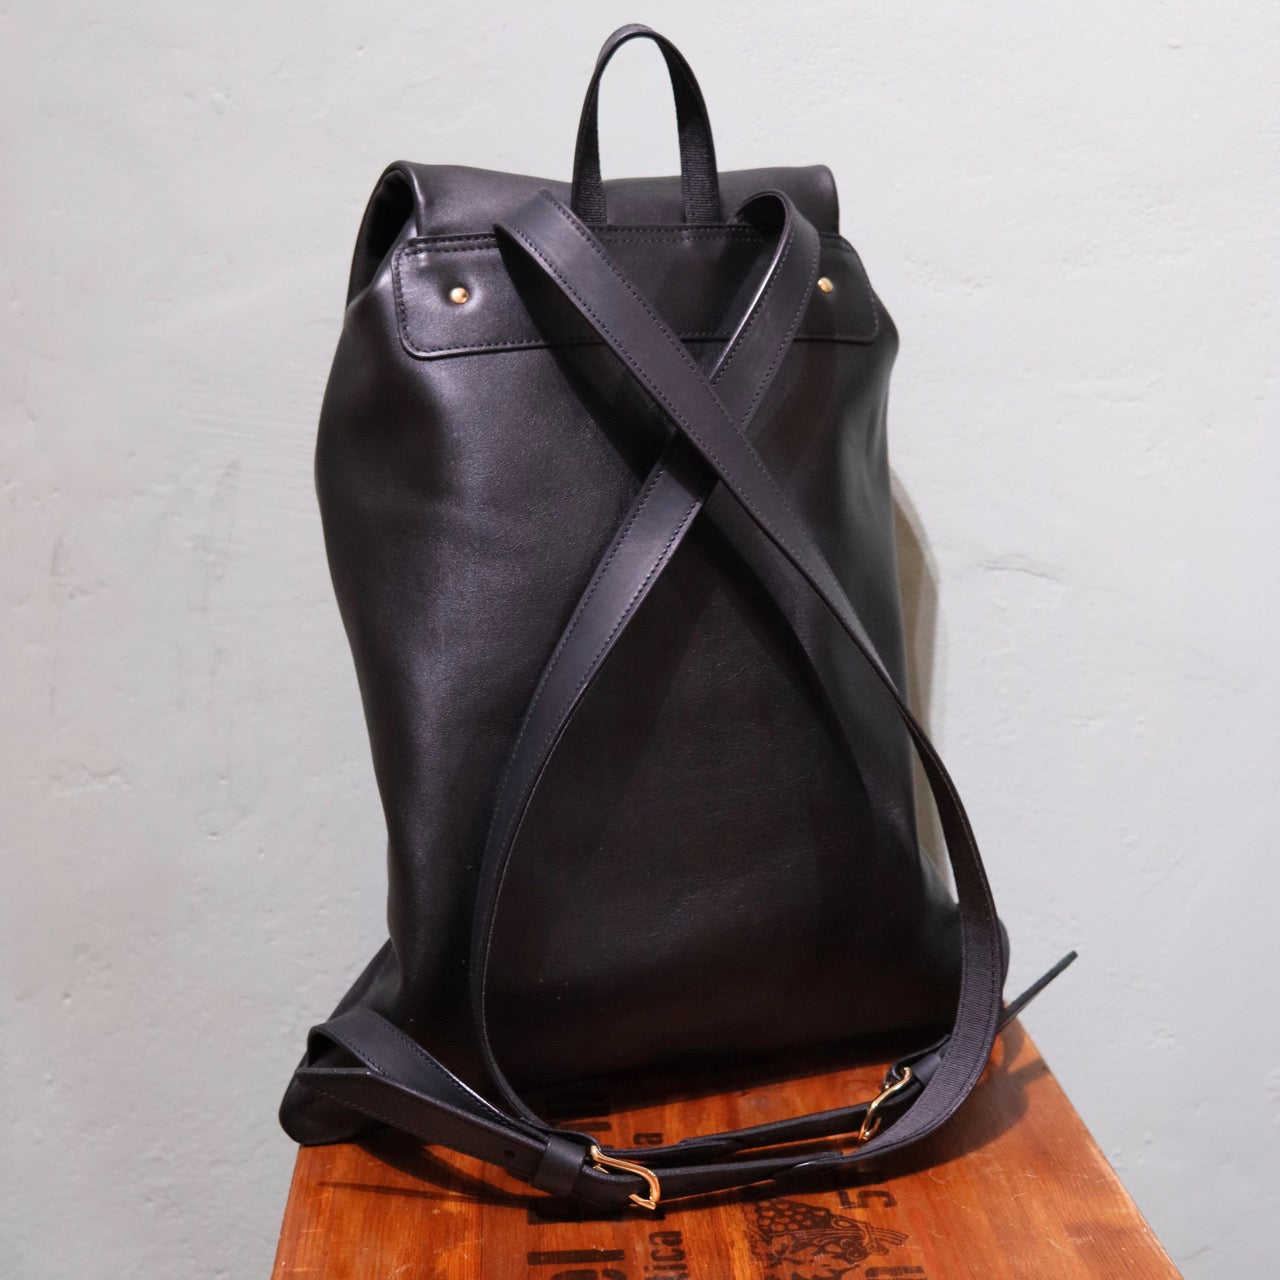 Backpack Berlin - Made to order